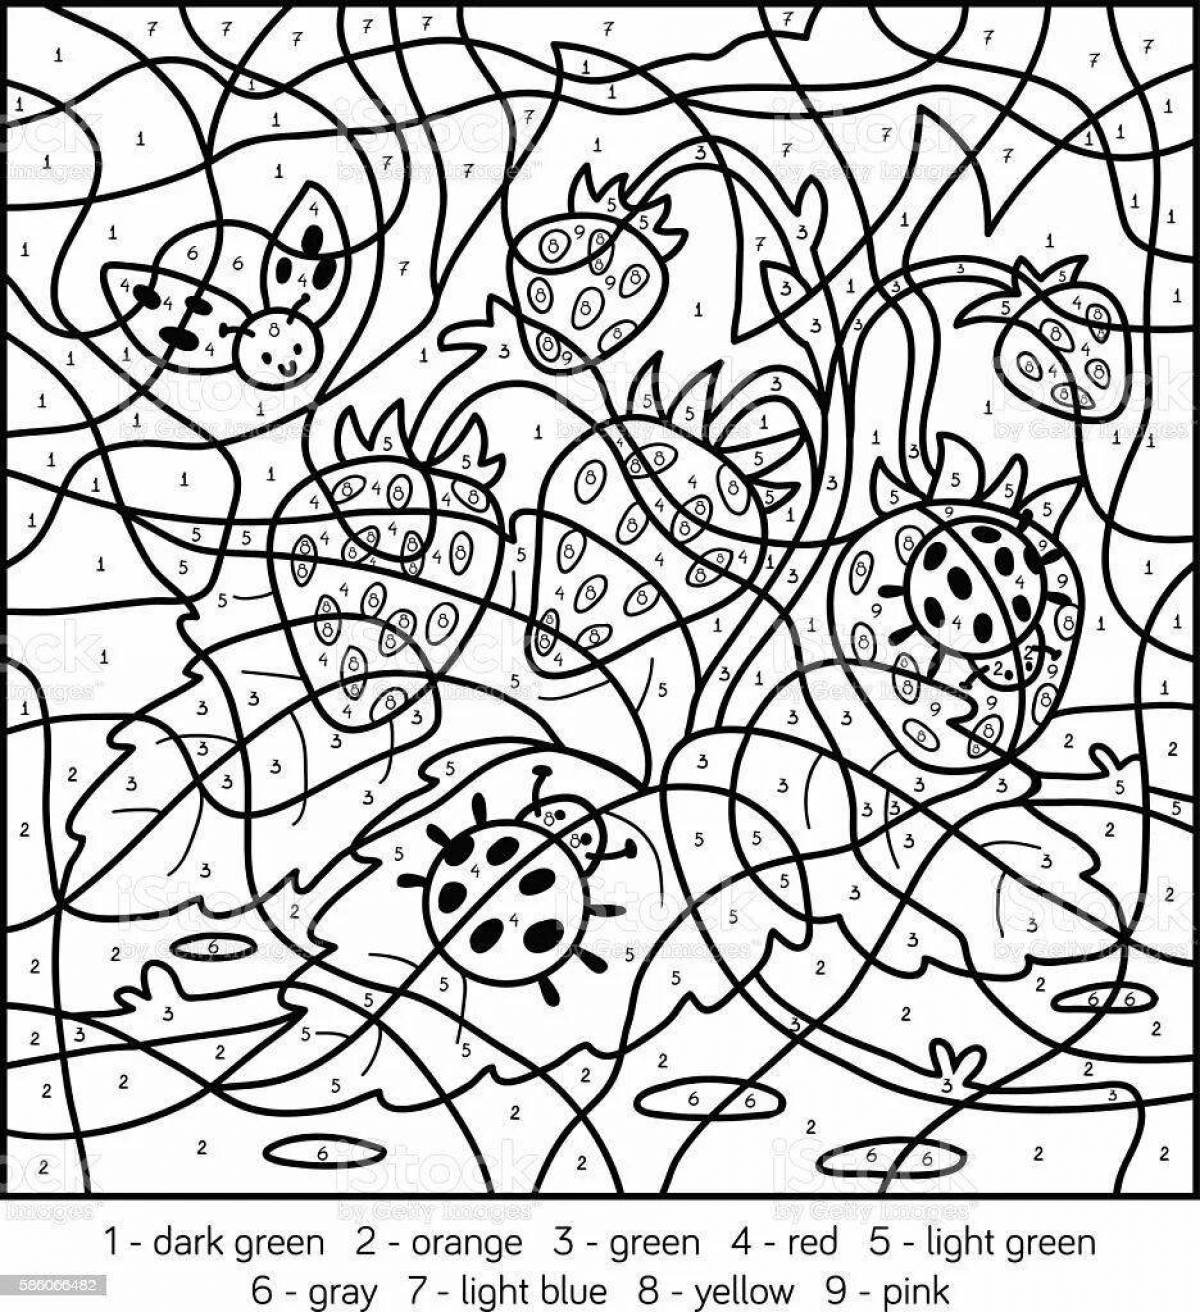 Amazing strawberry number coloring game